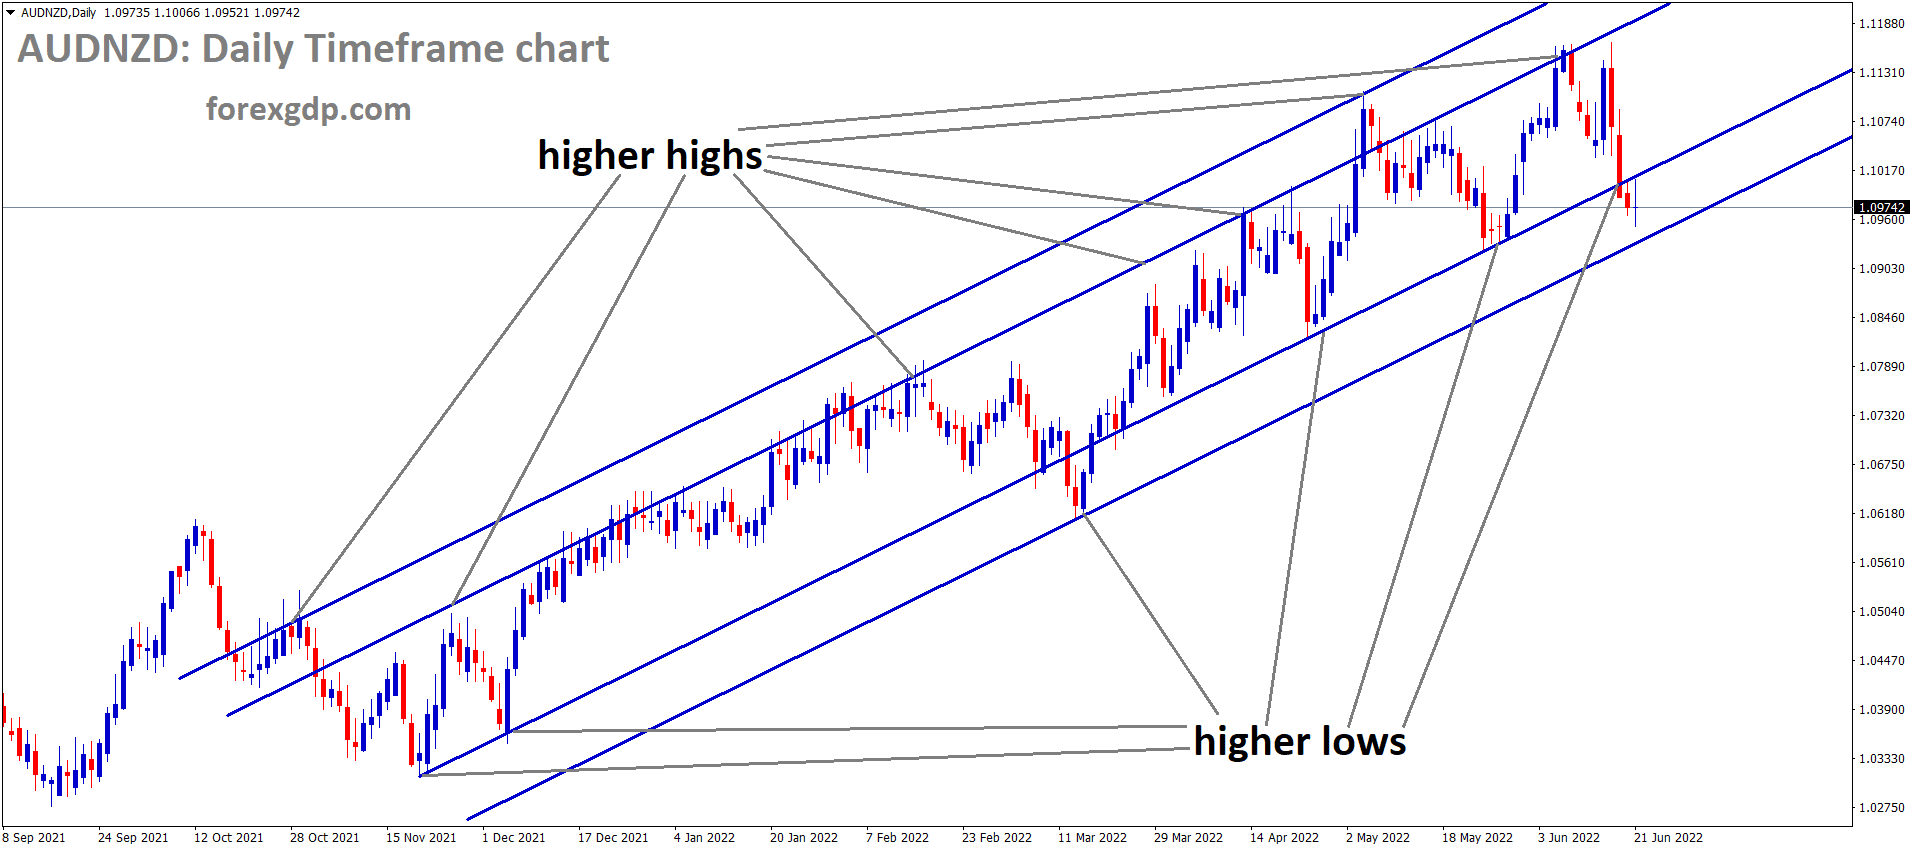 AUDNZD is moving in an Ascending channel and the Market has reached the higher low area of the channel